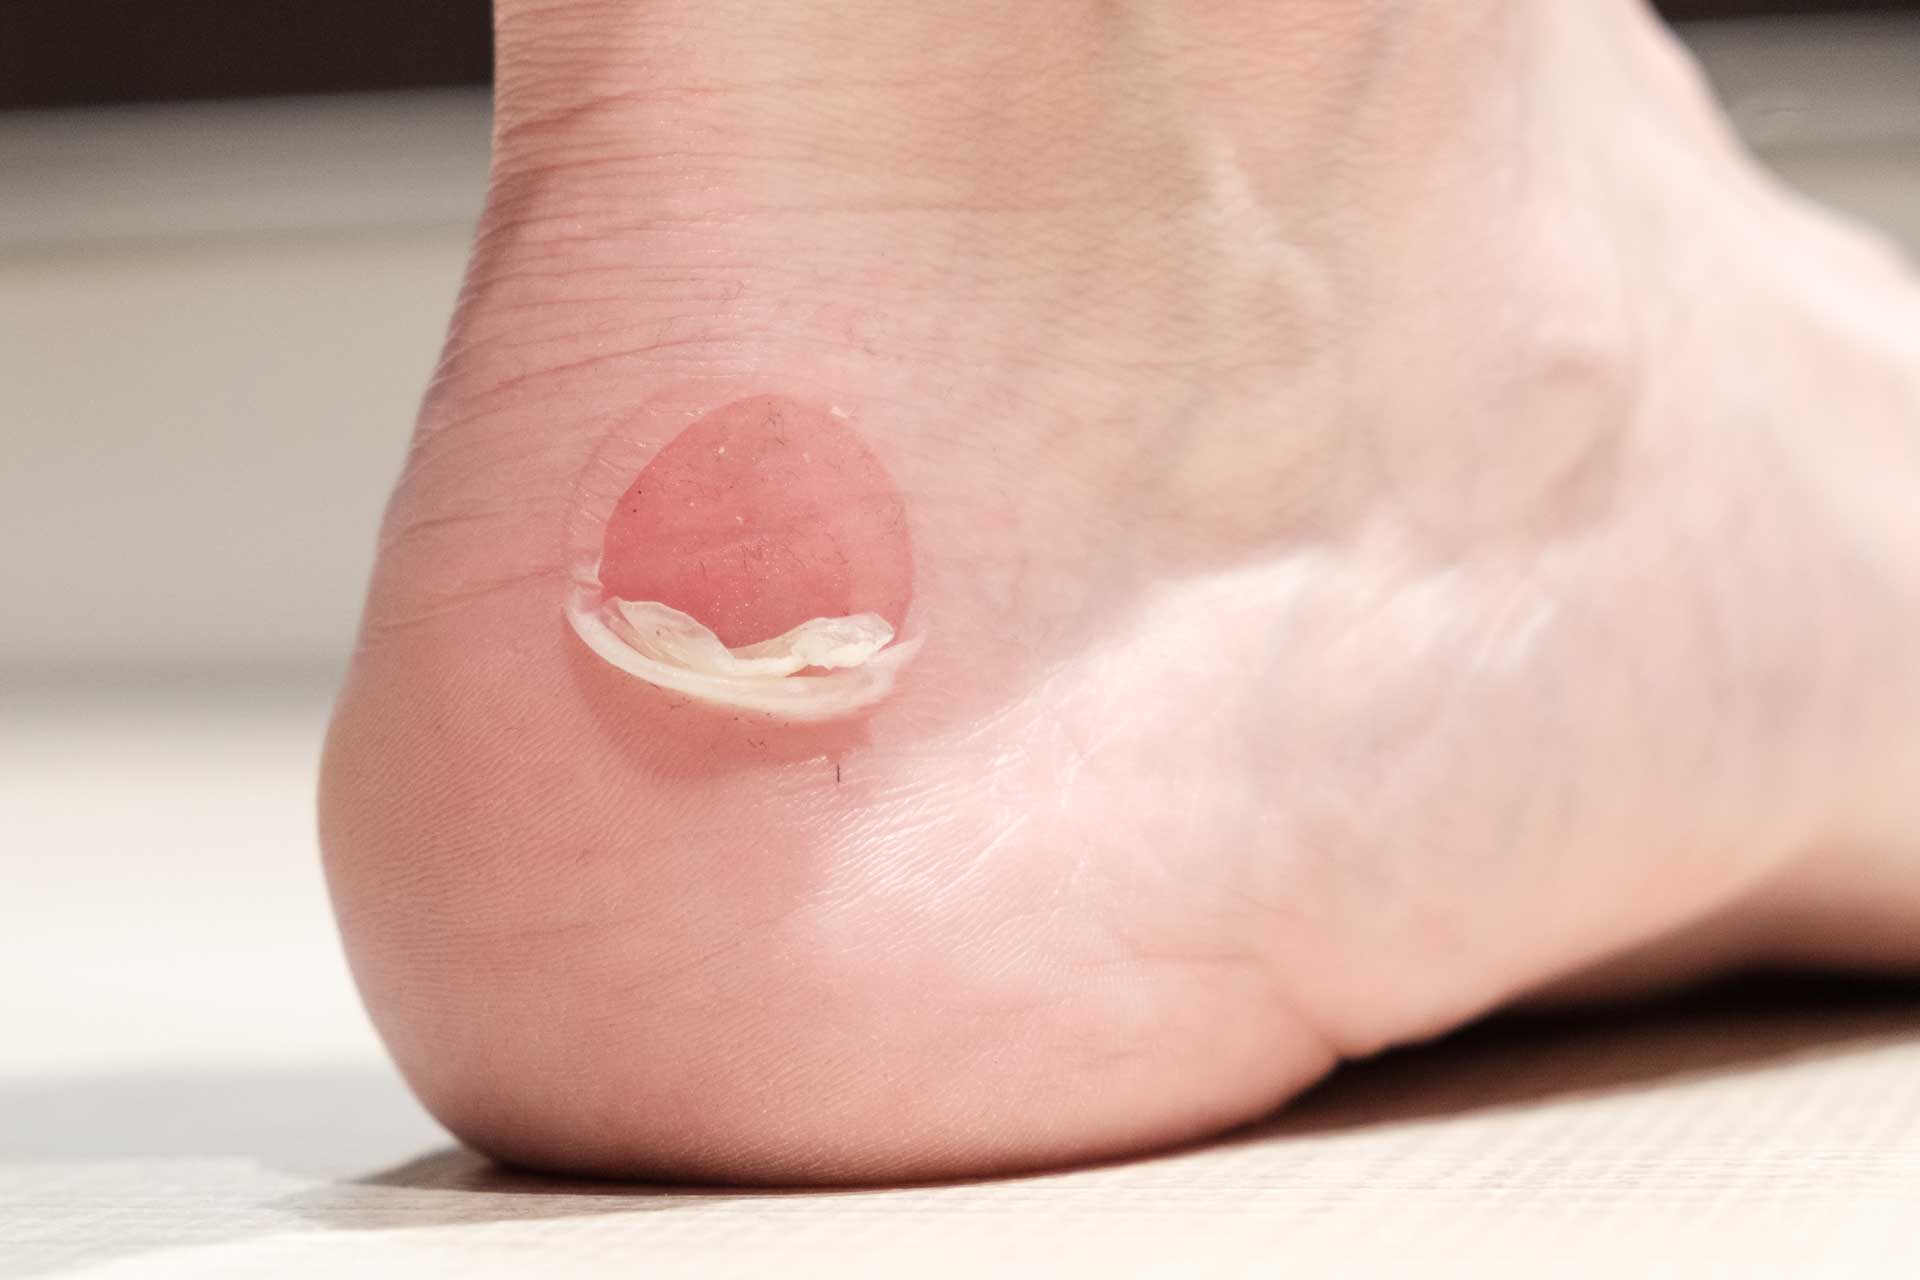 Foot Blisters - Very Annoying!